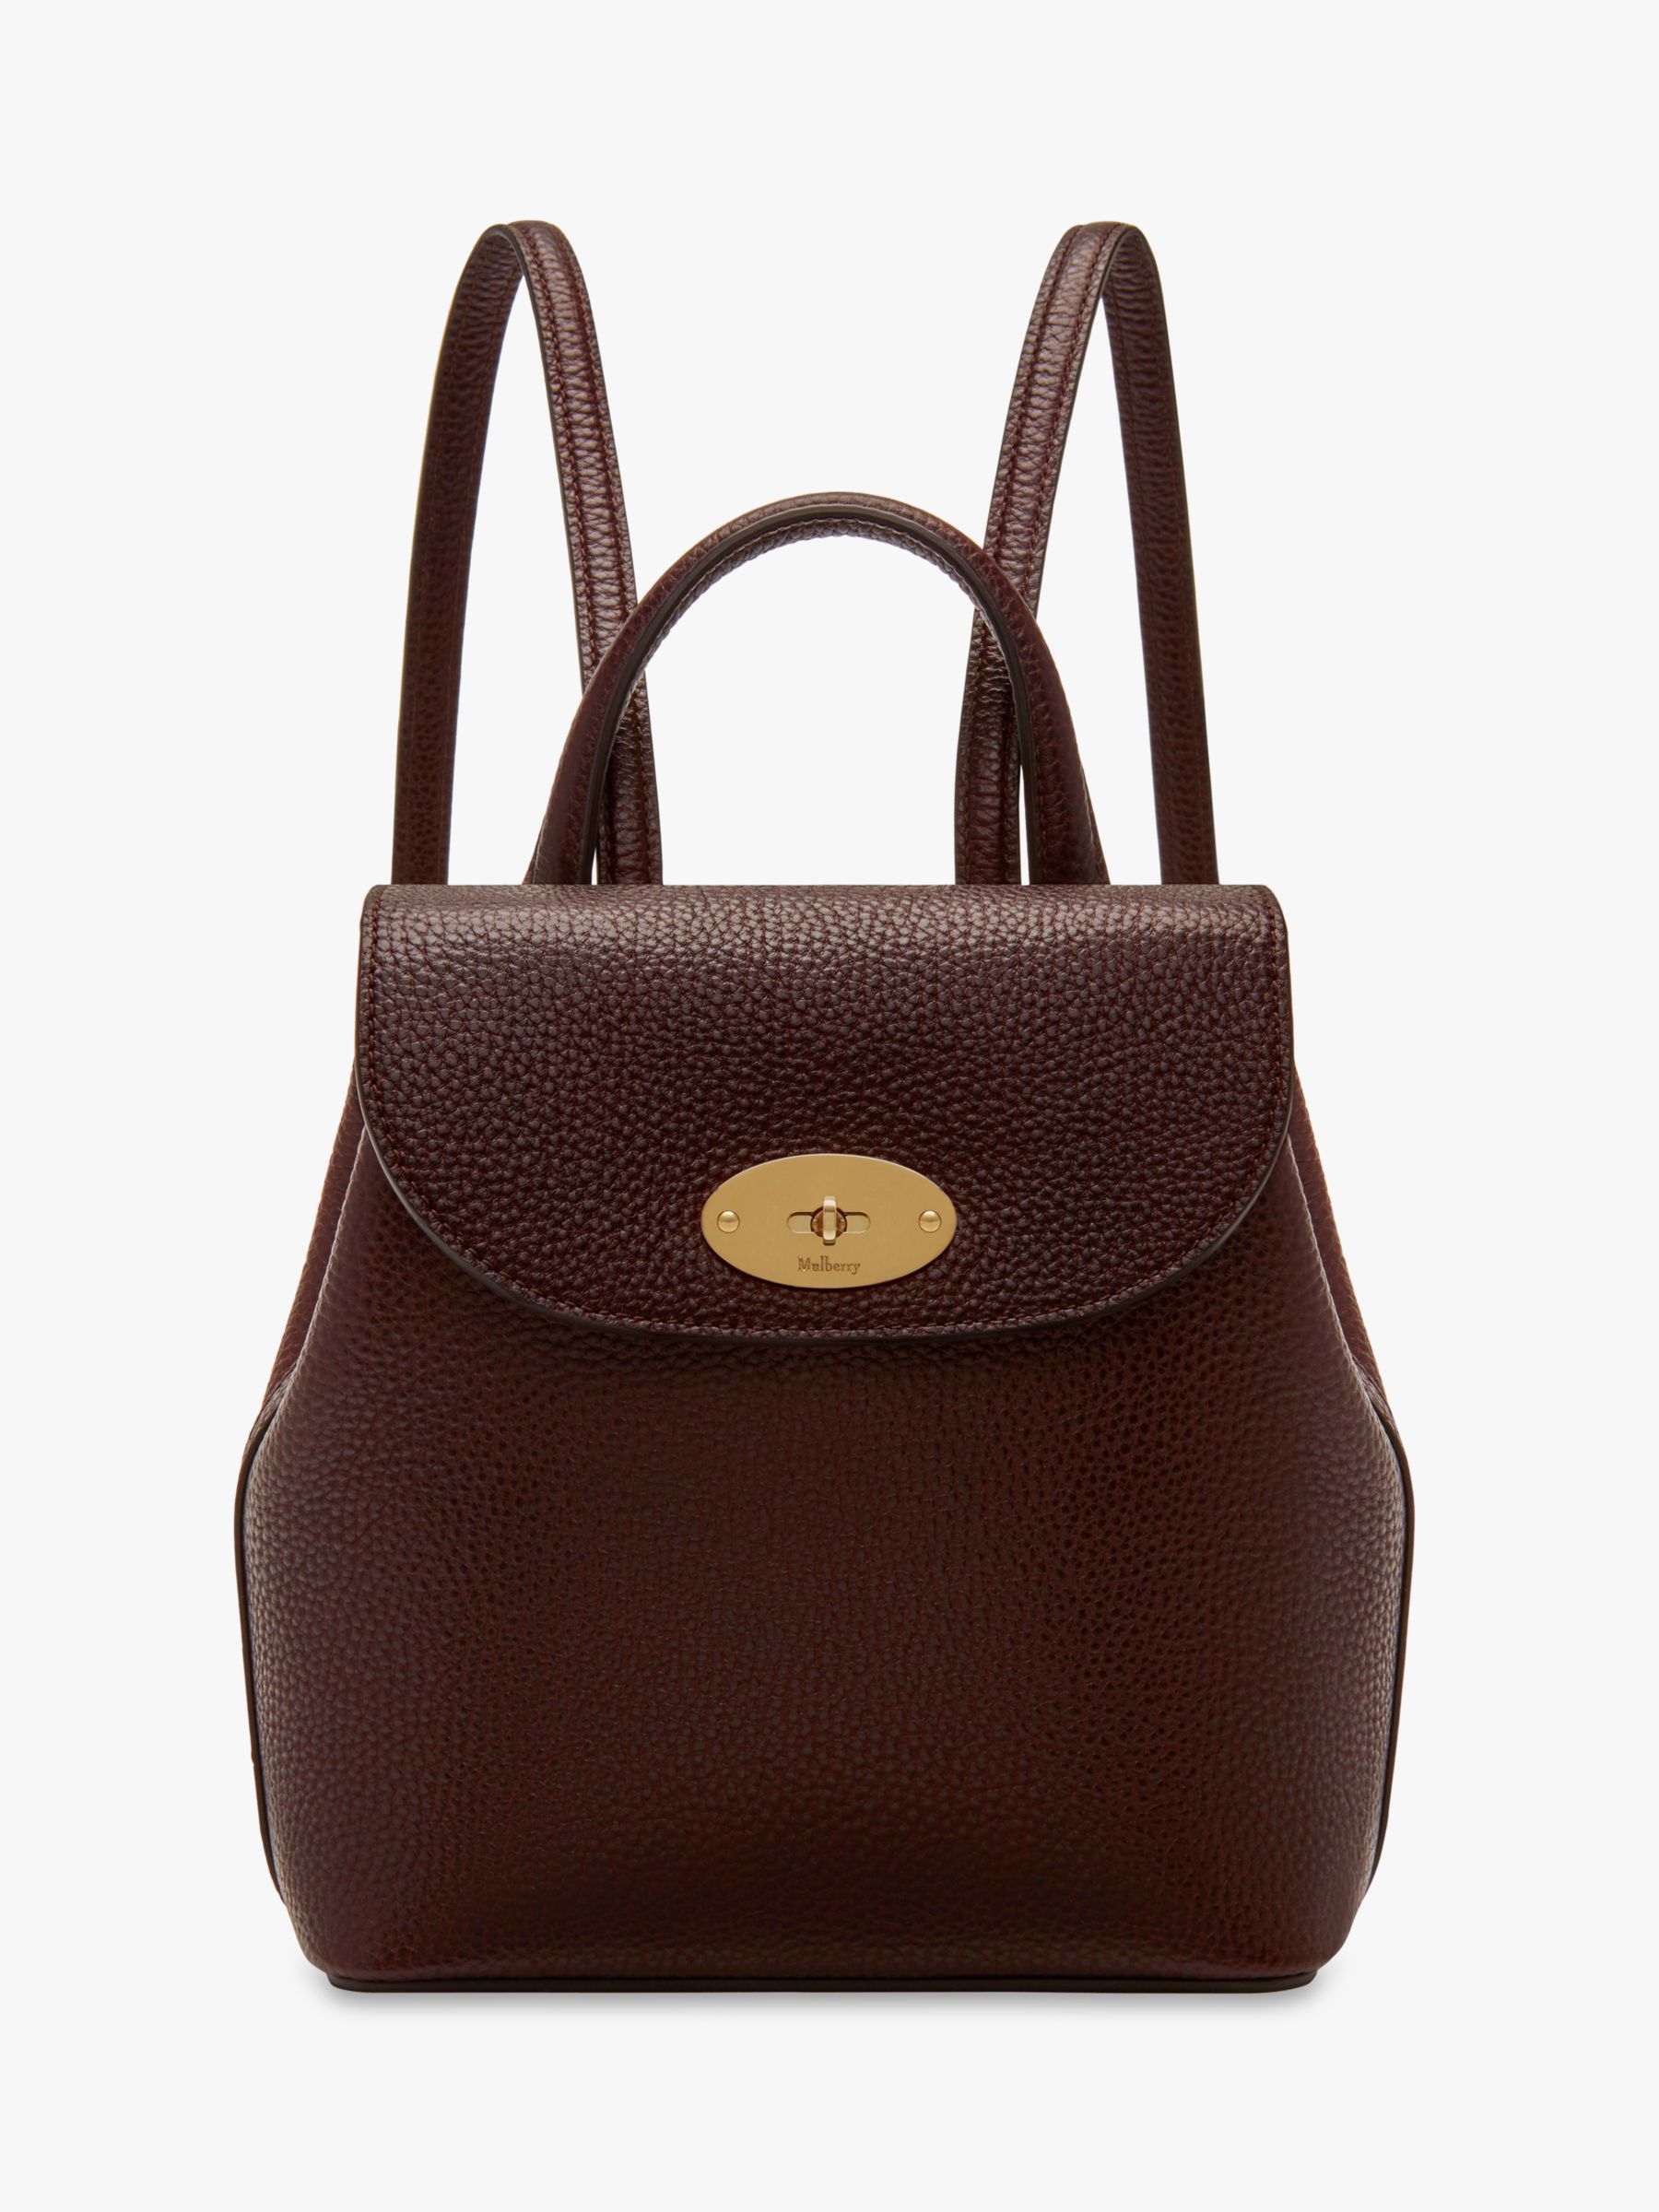 Mulberry Mini Bayswater Backpack In Oak Natural Grain Leather in Brown